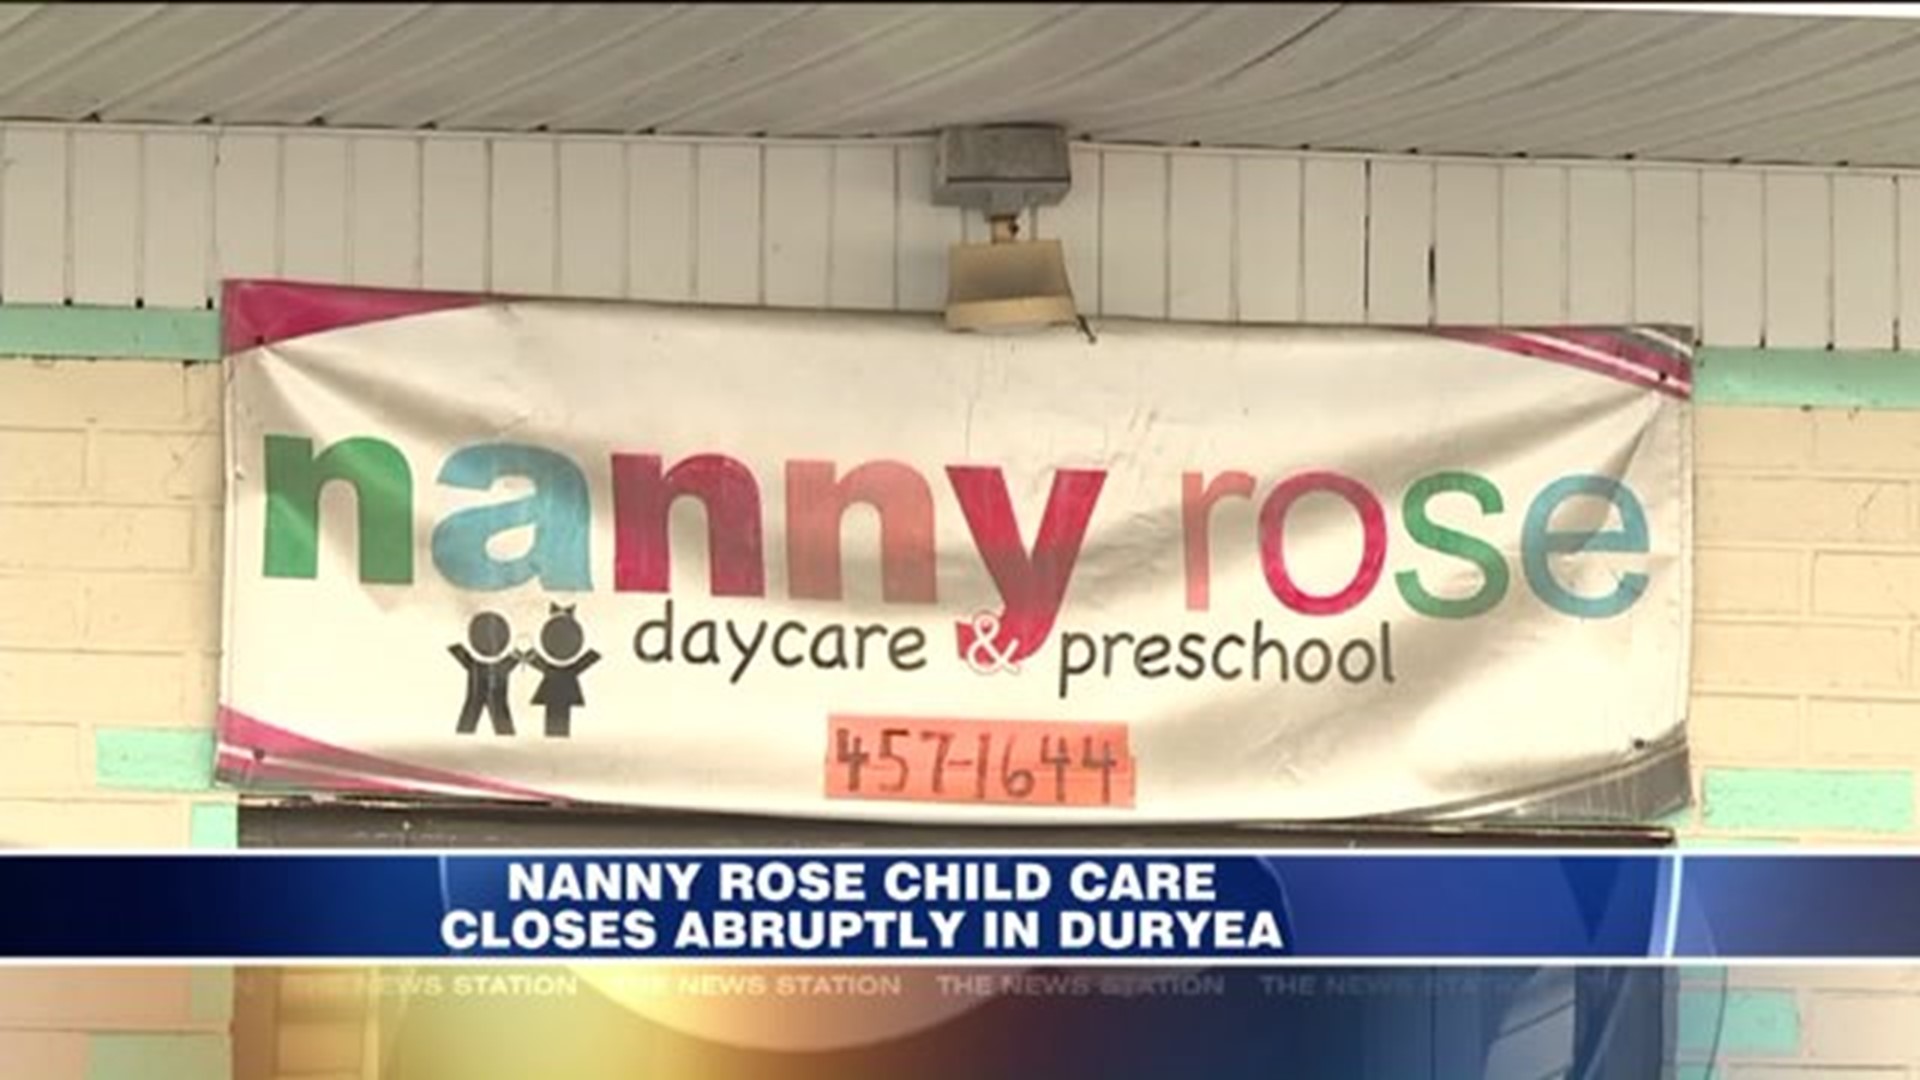 Nanny Rose Child Care in Duryea Closes Abruptly